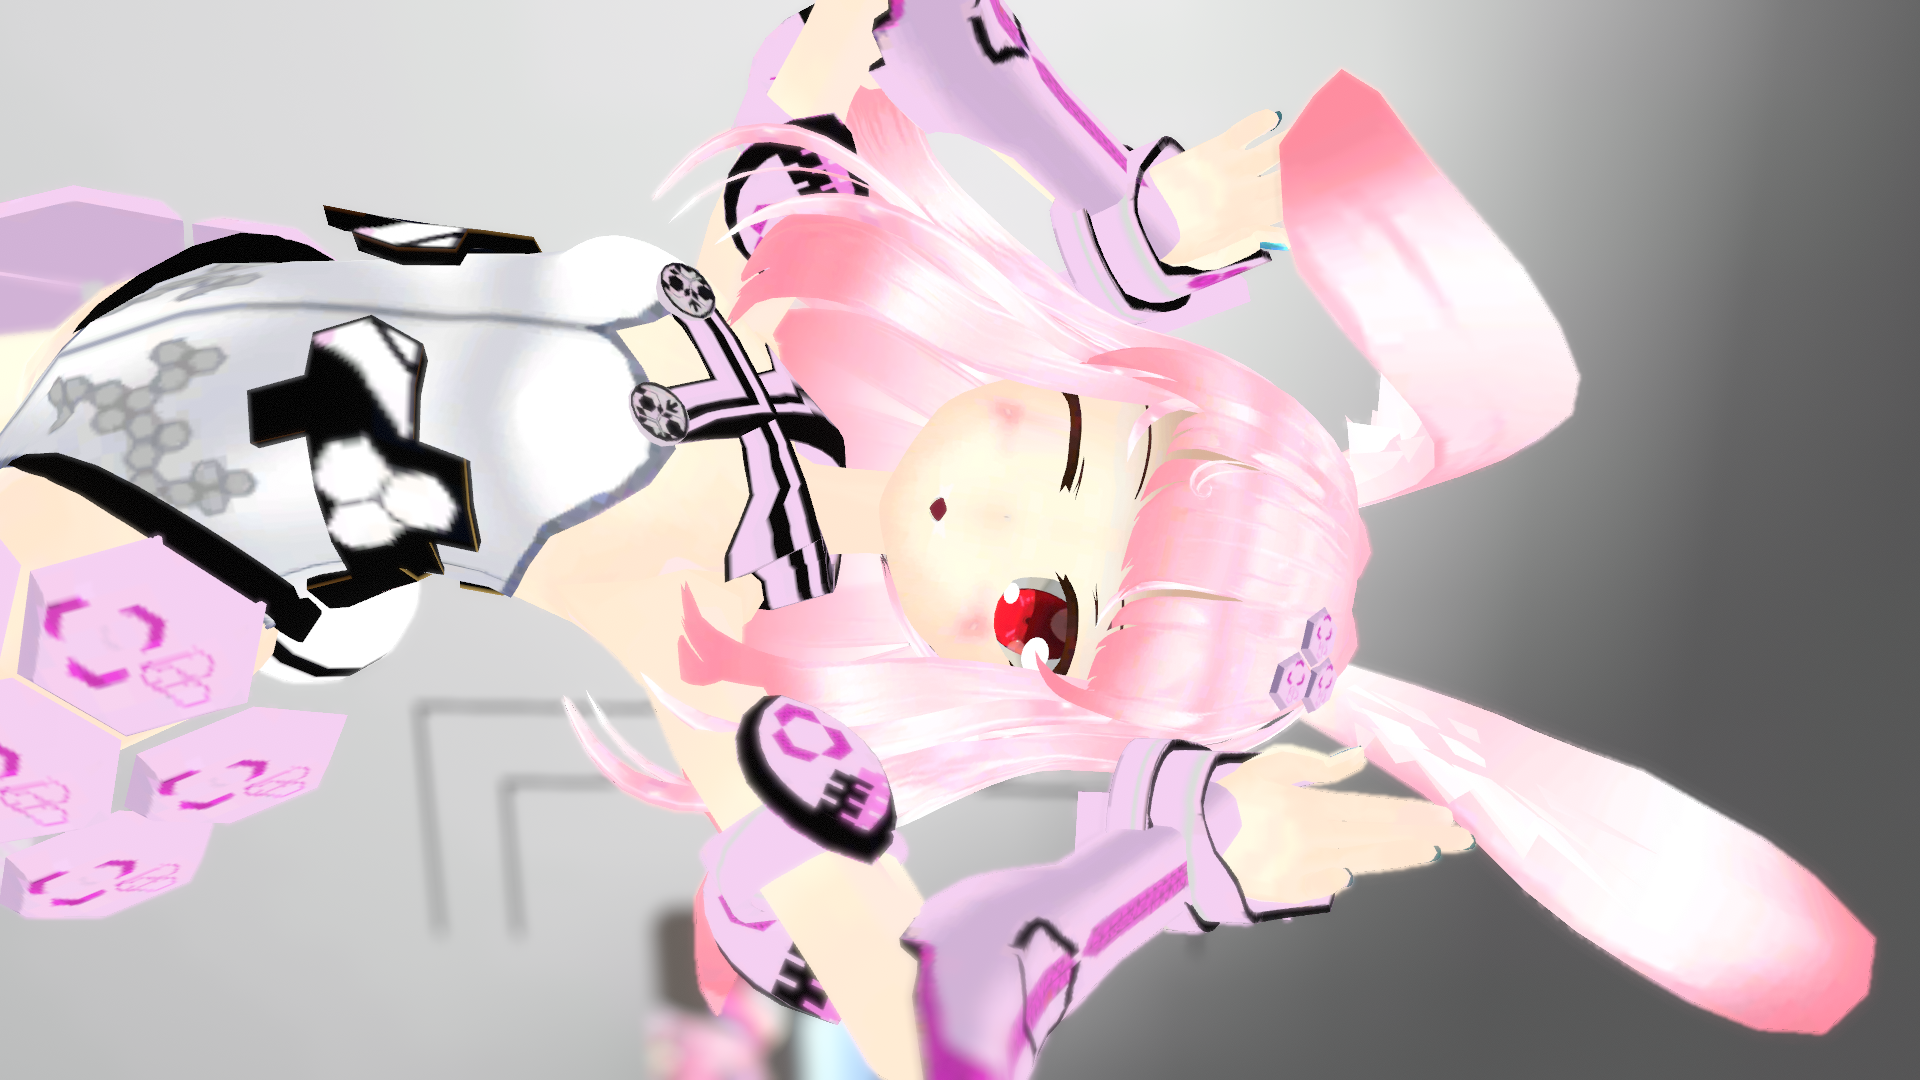 VRChat_1920x1080_2021-12-05_05-53-48.447.png